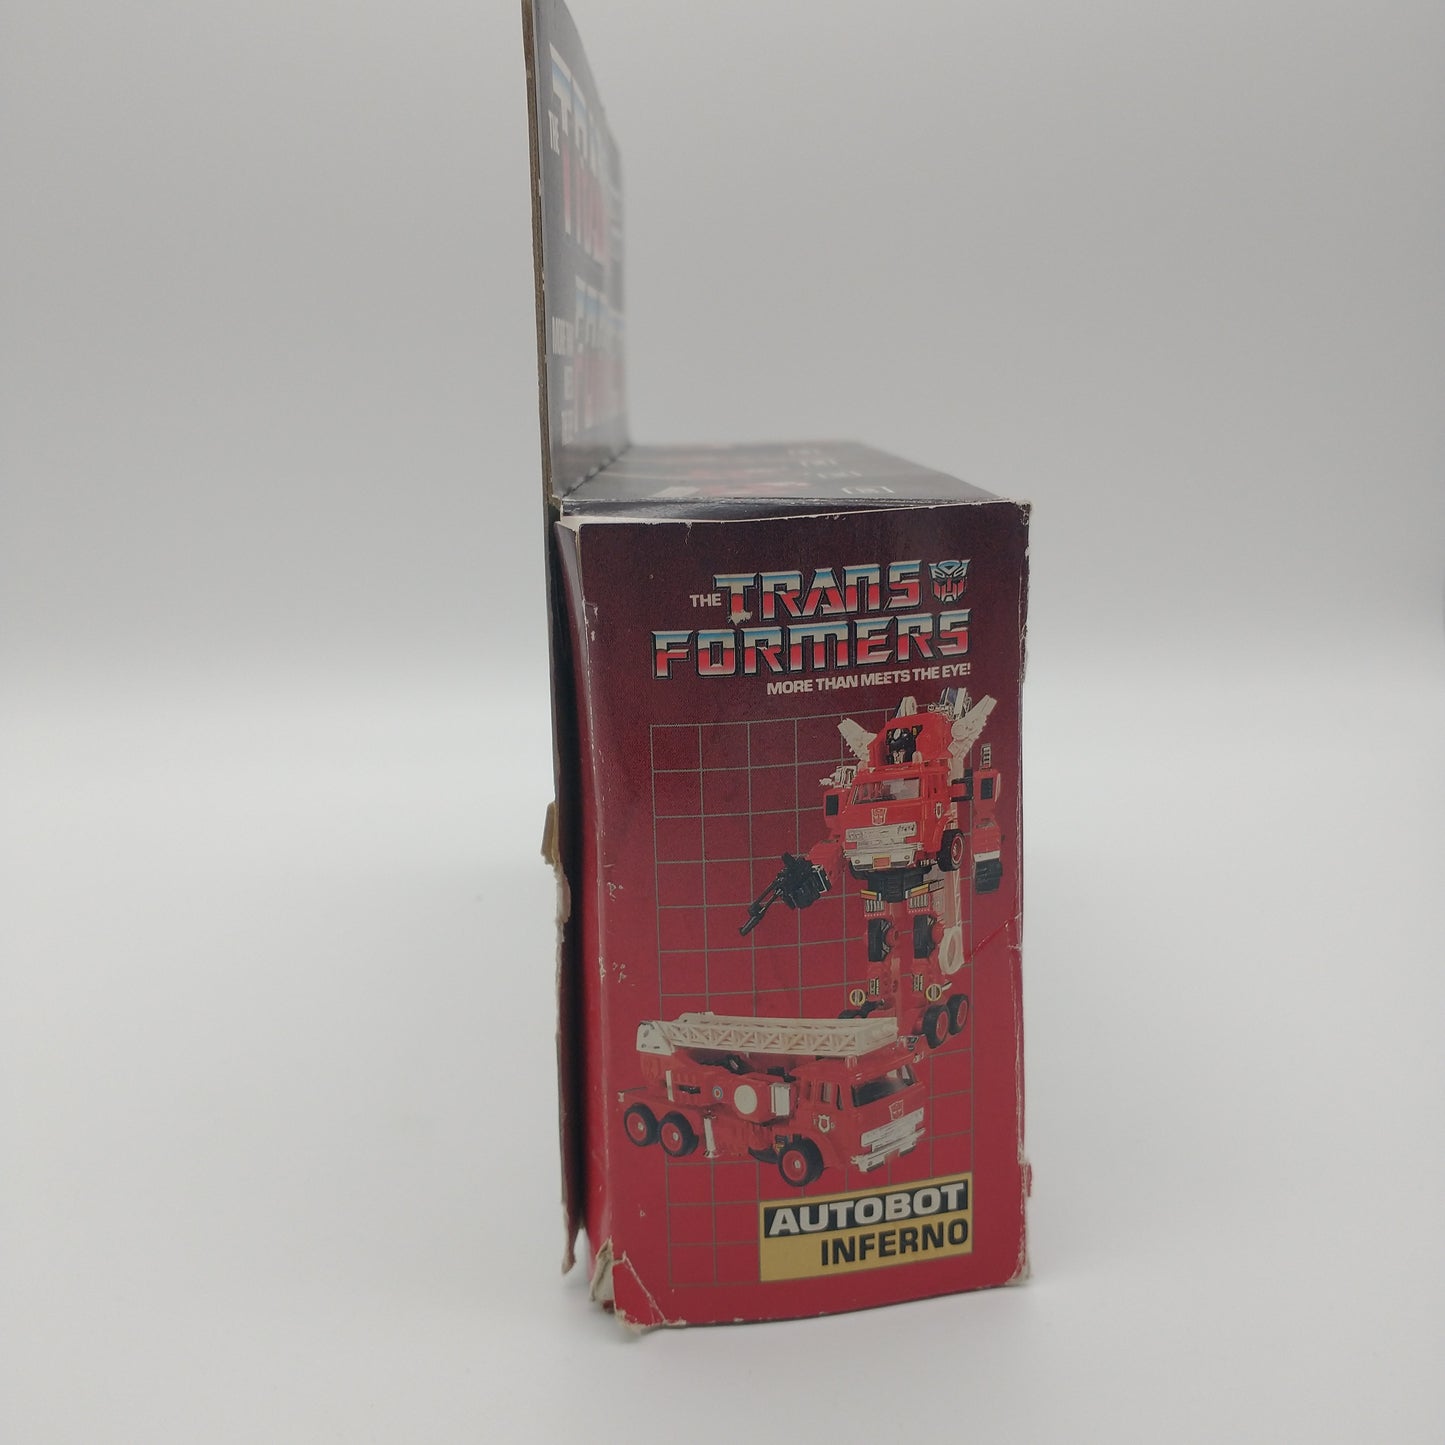 The right side of the box is red with a picture of the figure